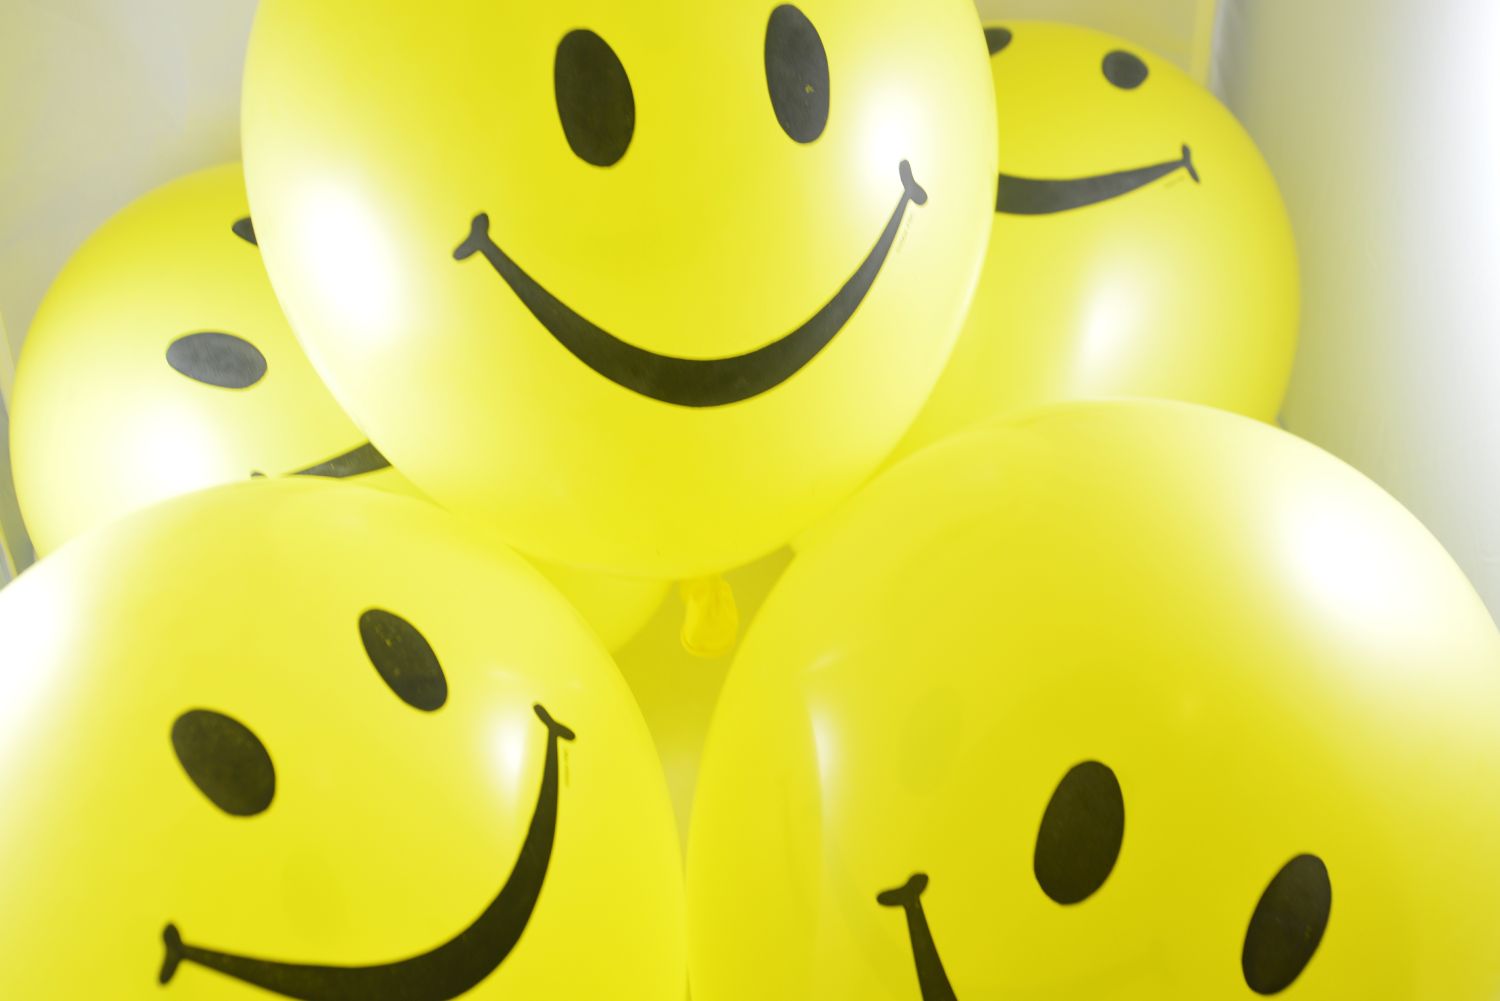 50 Ways To Spread Happiness